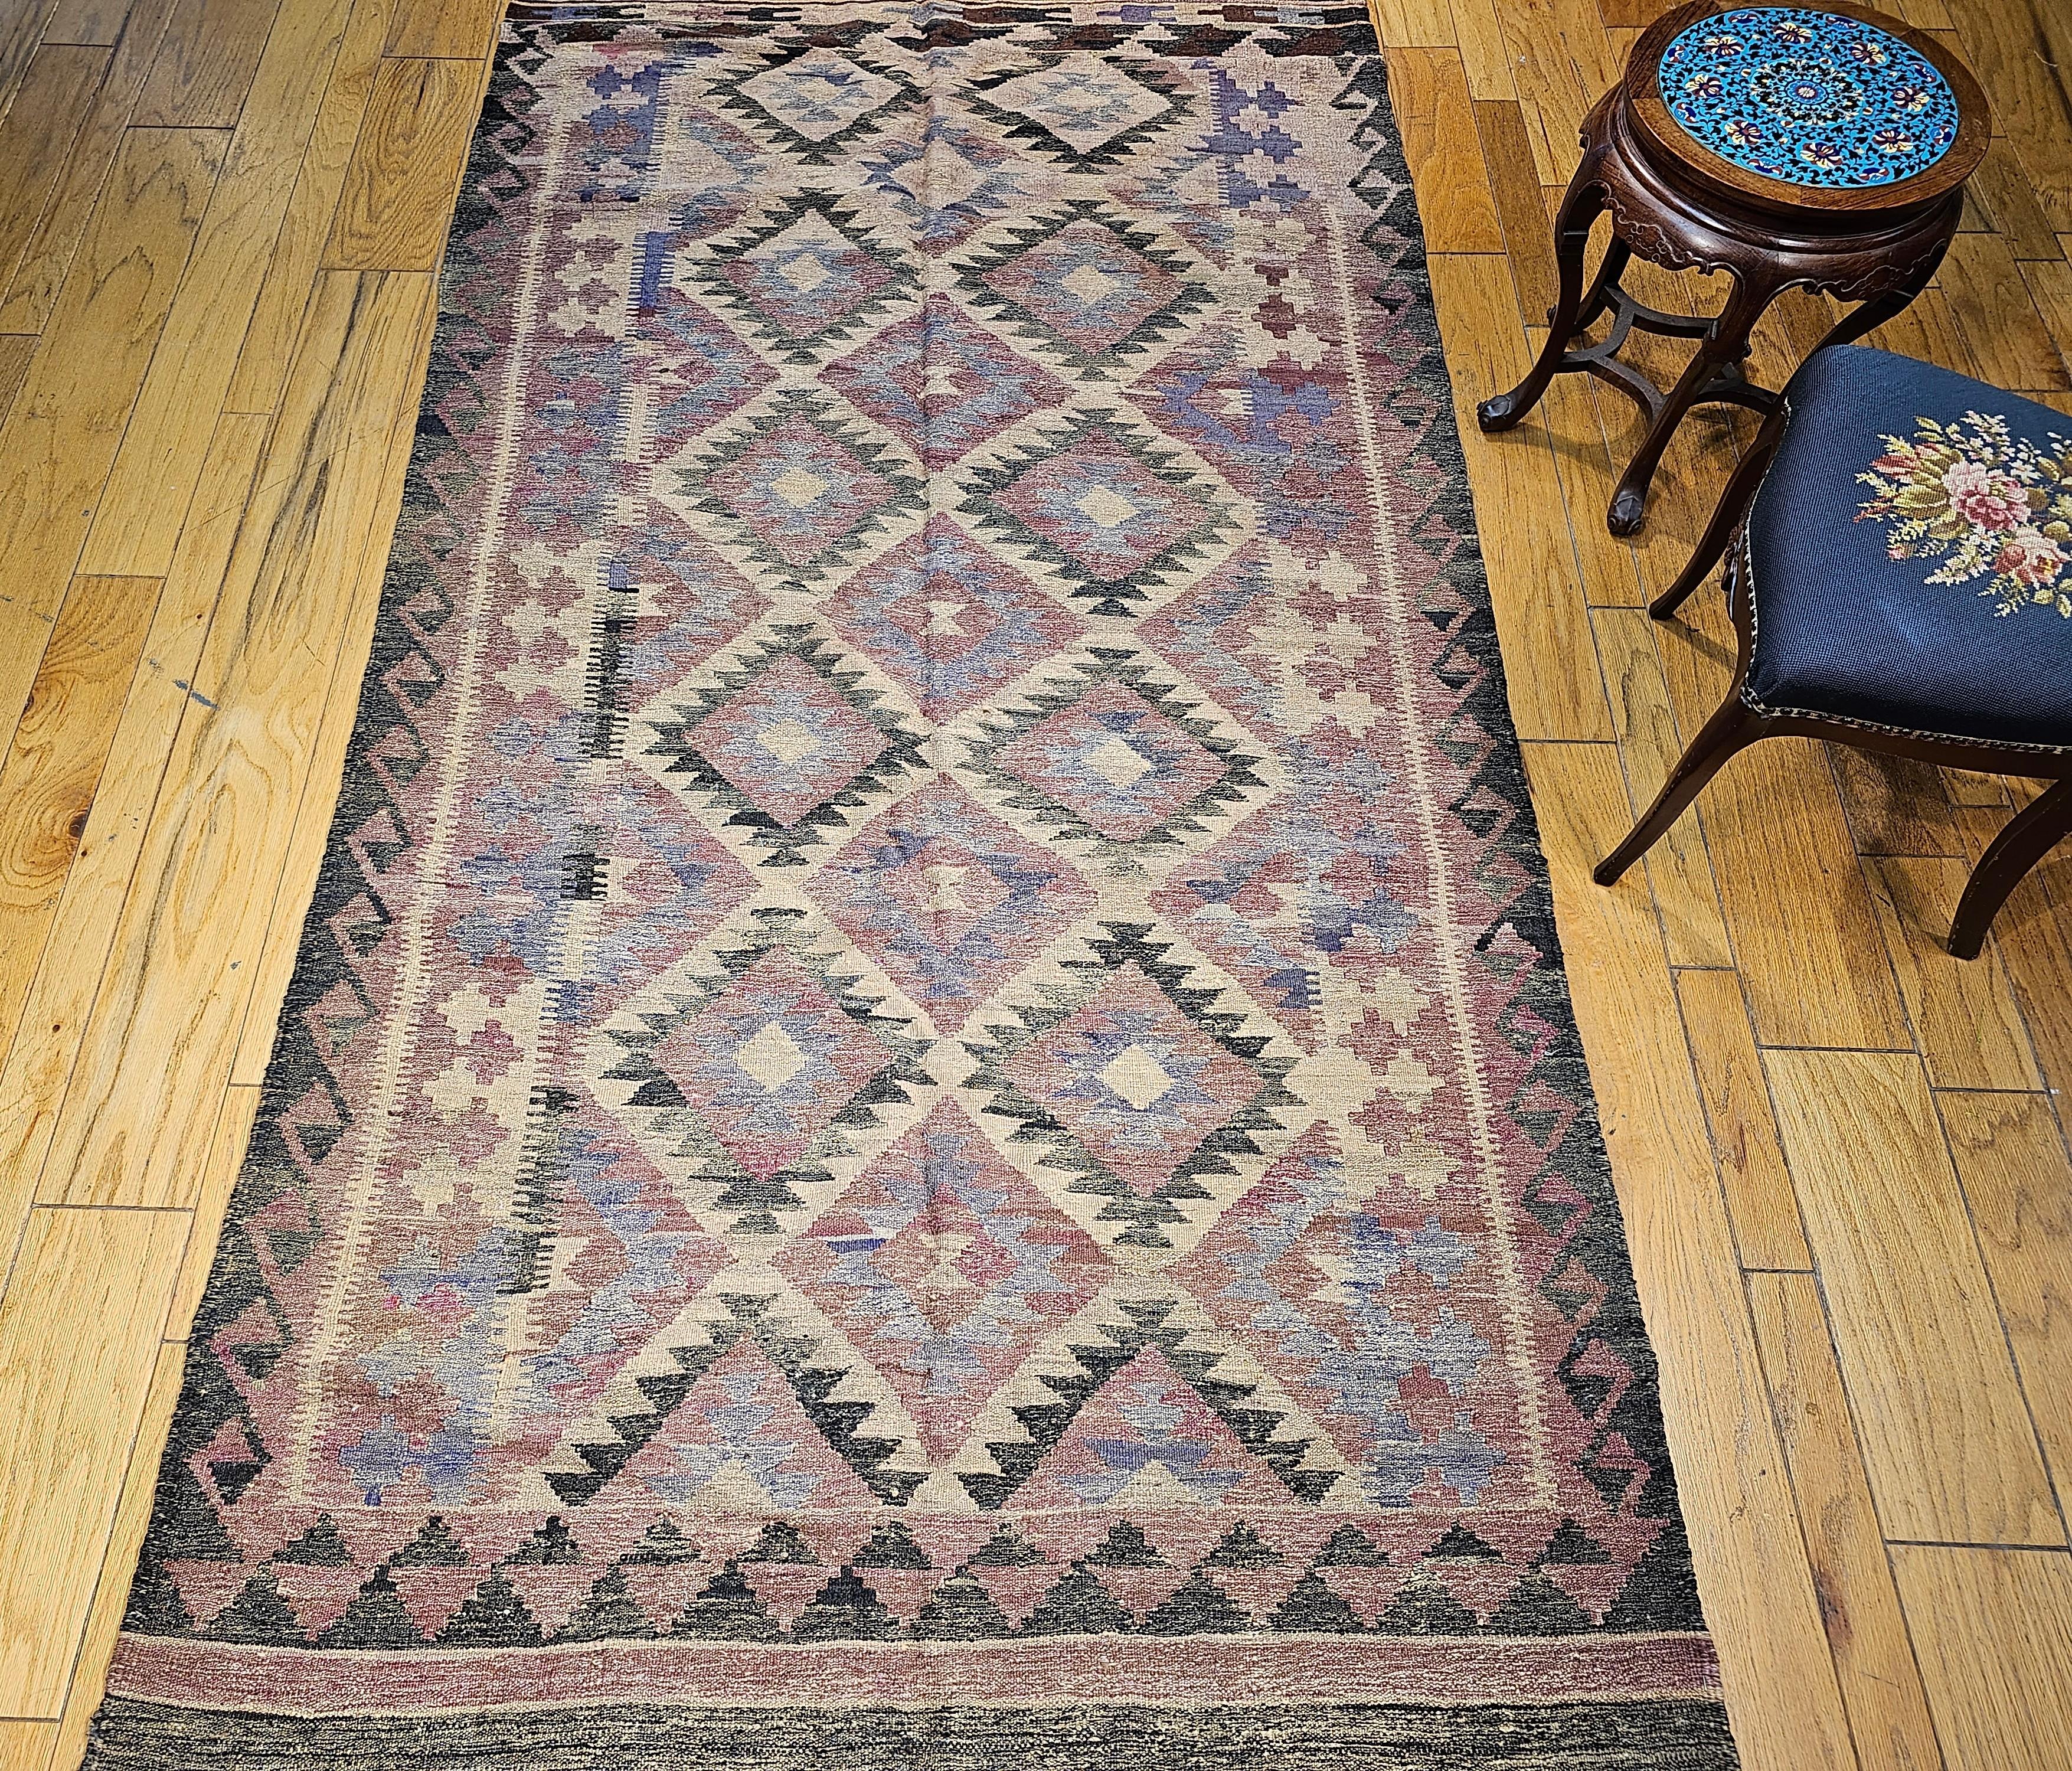 Vintage Kilim in Southwestern Colors and Pattern in Lavender, Brown, Cream, Red For Sale 4